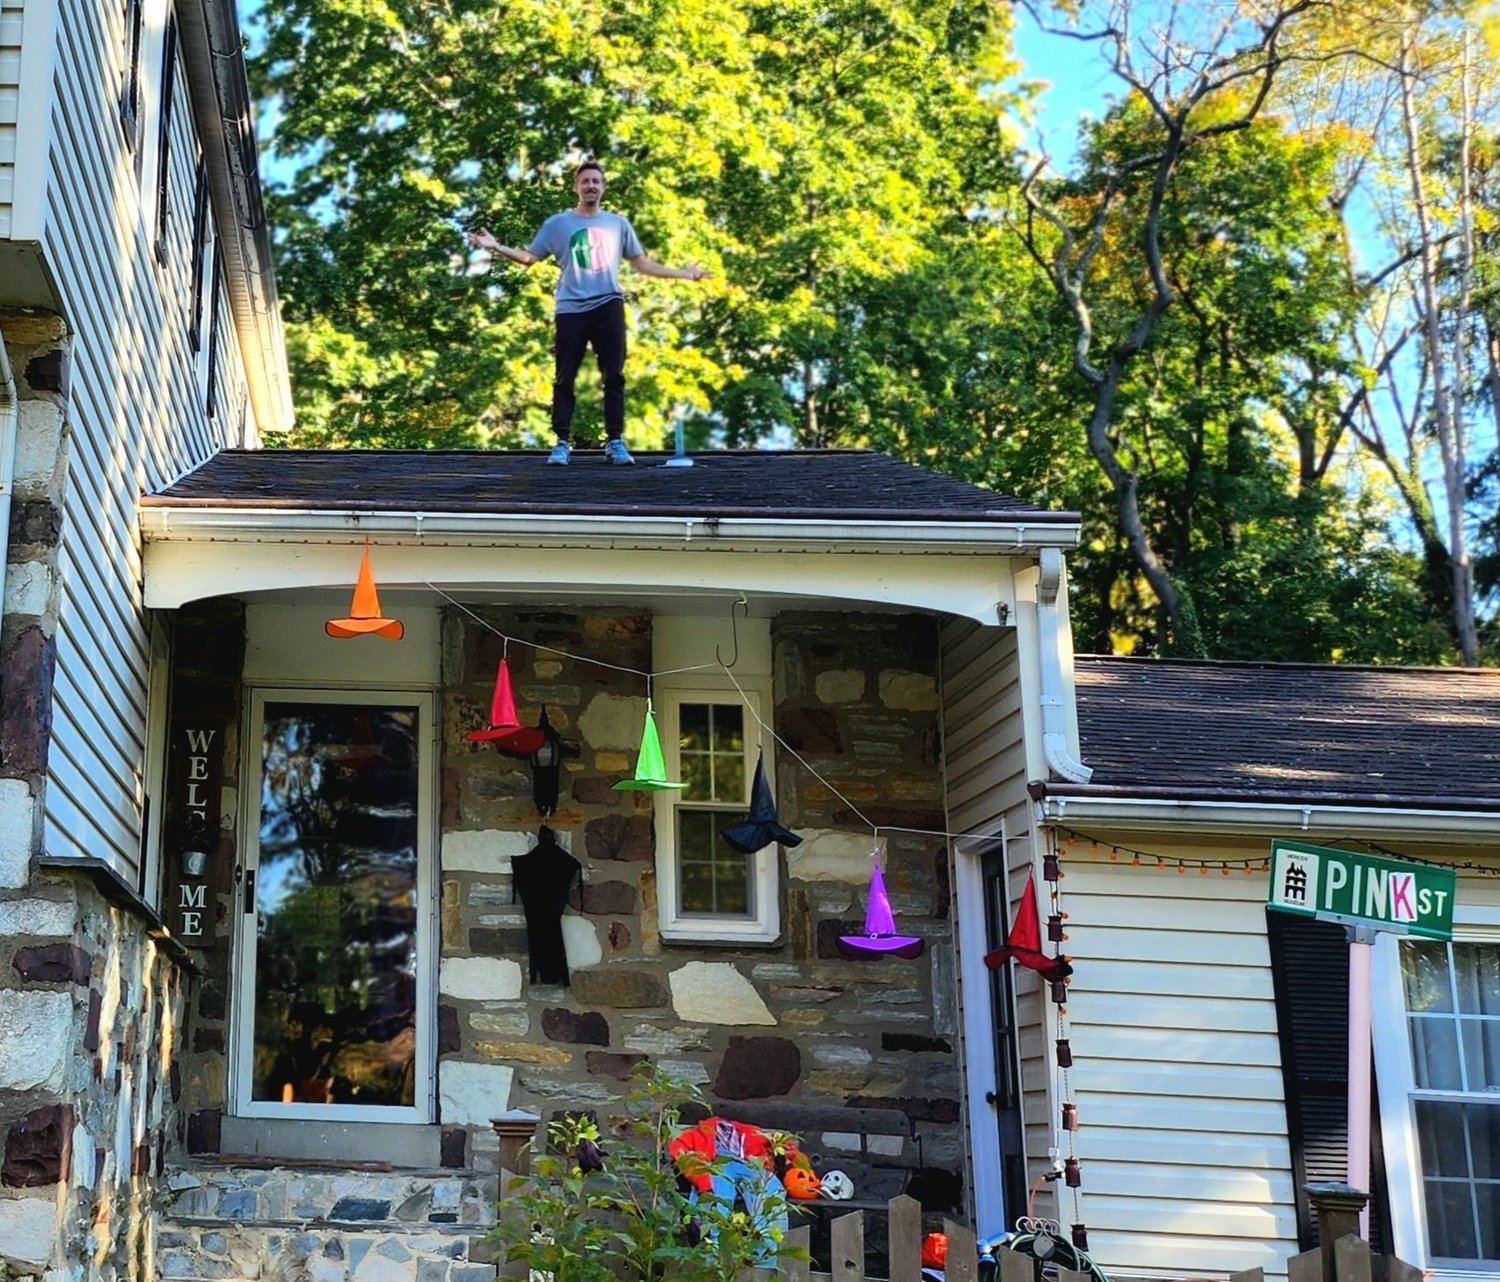 Keith Fenimore, on the roof of his house in Doylestown, is ready for an unconventional Pine2Pink fundraising event.